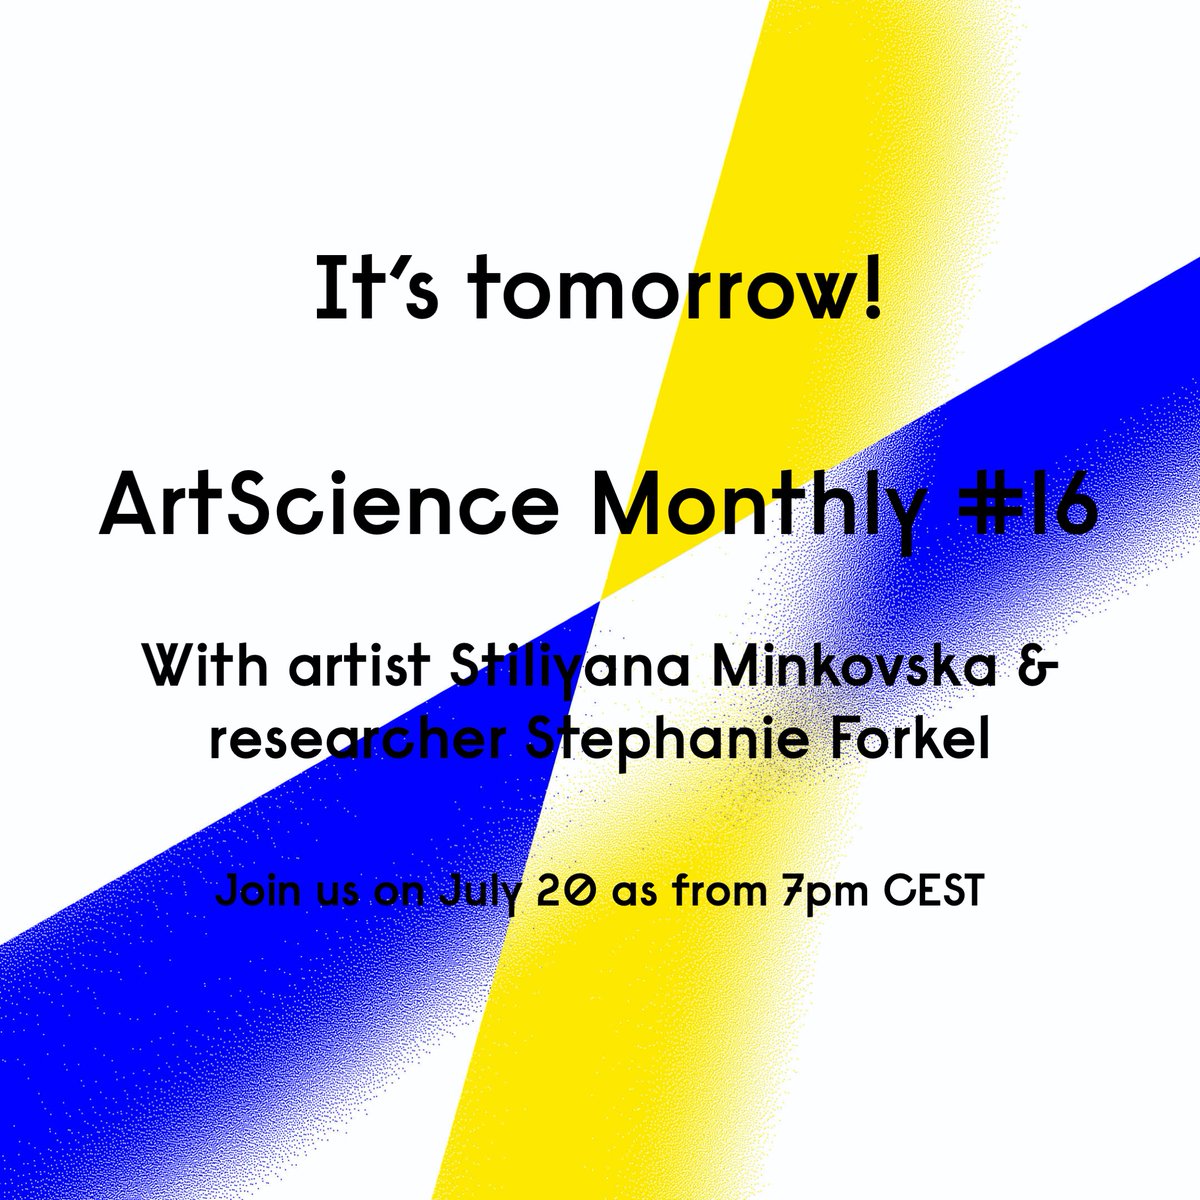 It's tomorrow! This edition of the #artsciencemonthly has been curated by community members @bellainterstellar and @juditagui. Discussion groups will follow talks by artist @Stiliyana_m and neuroimaging researcher @stephforkel Registrations: cutt.ly/UmWHMbp